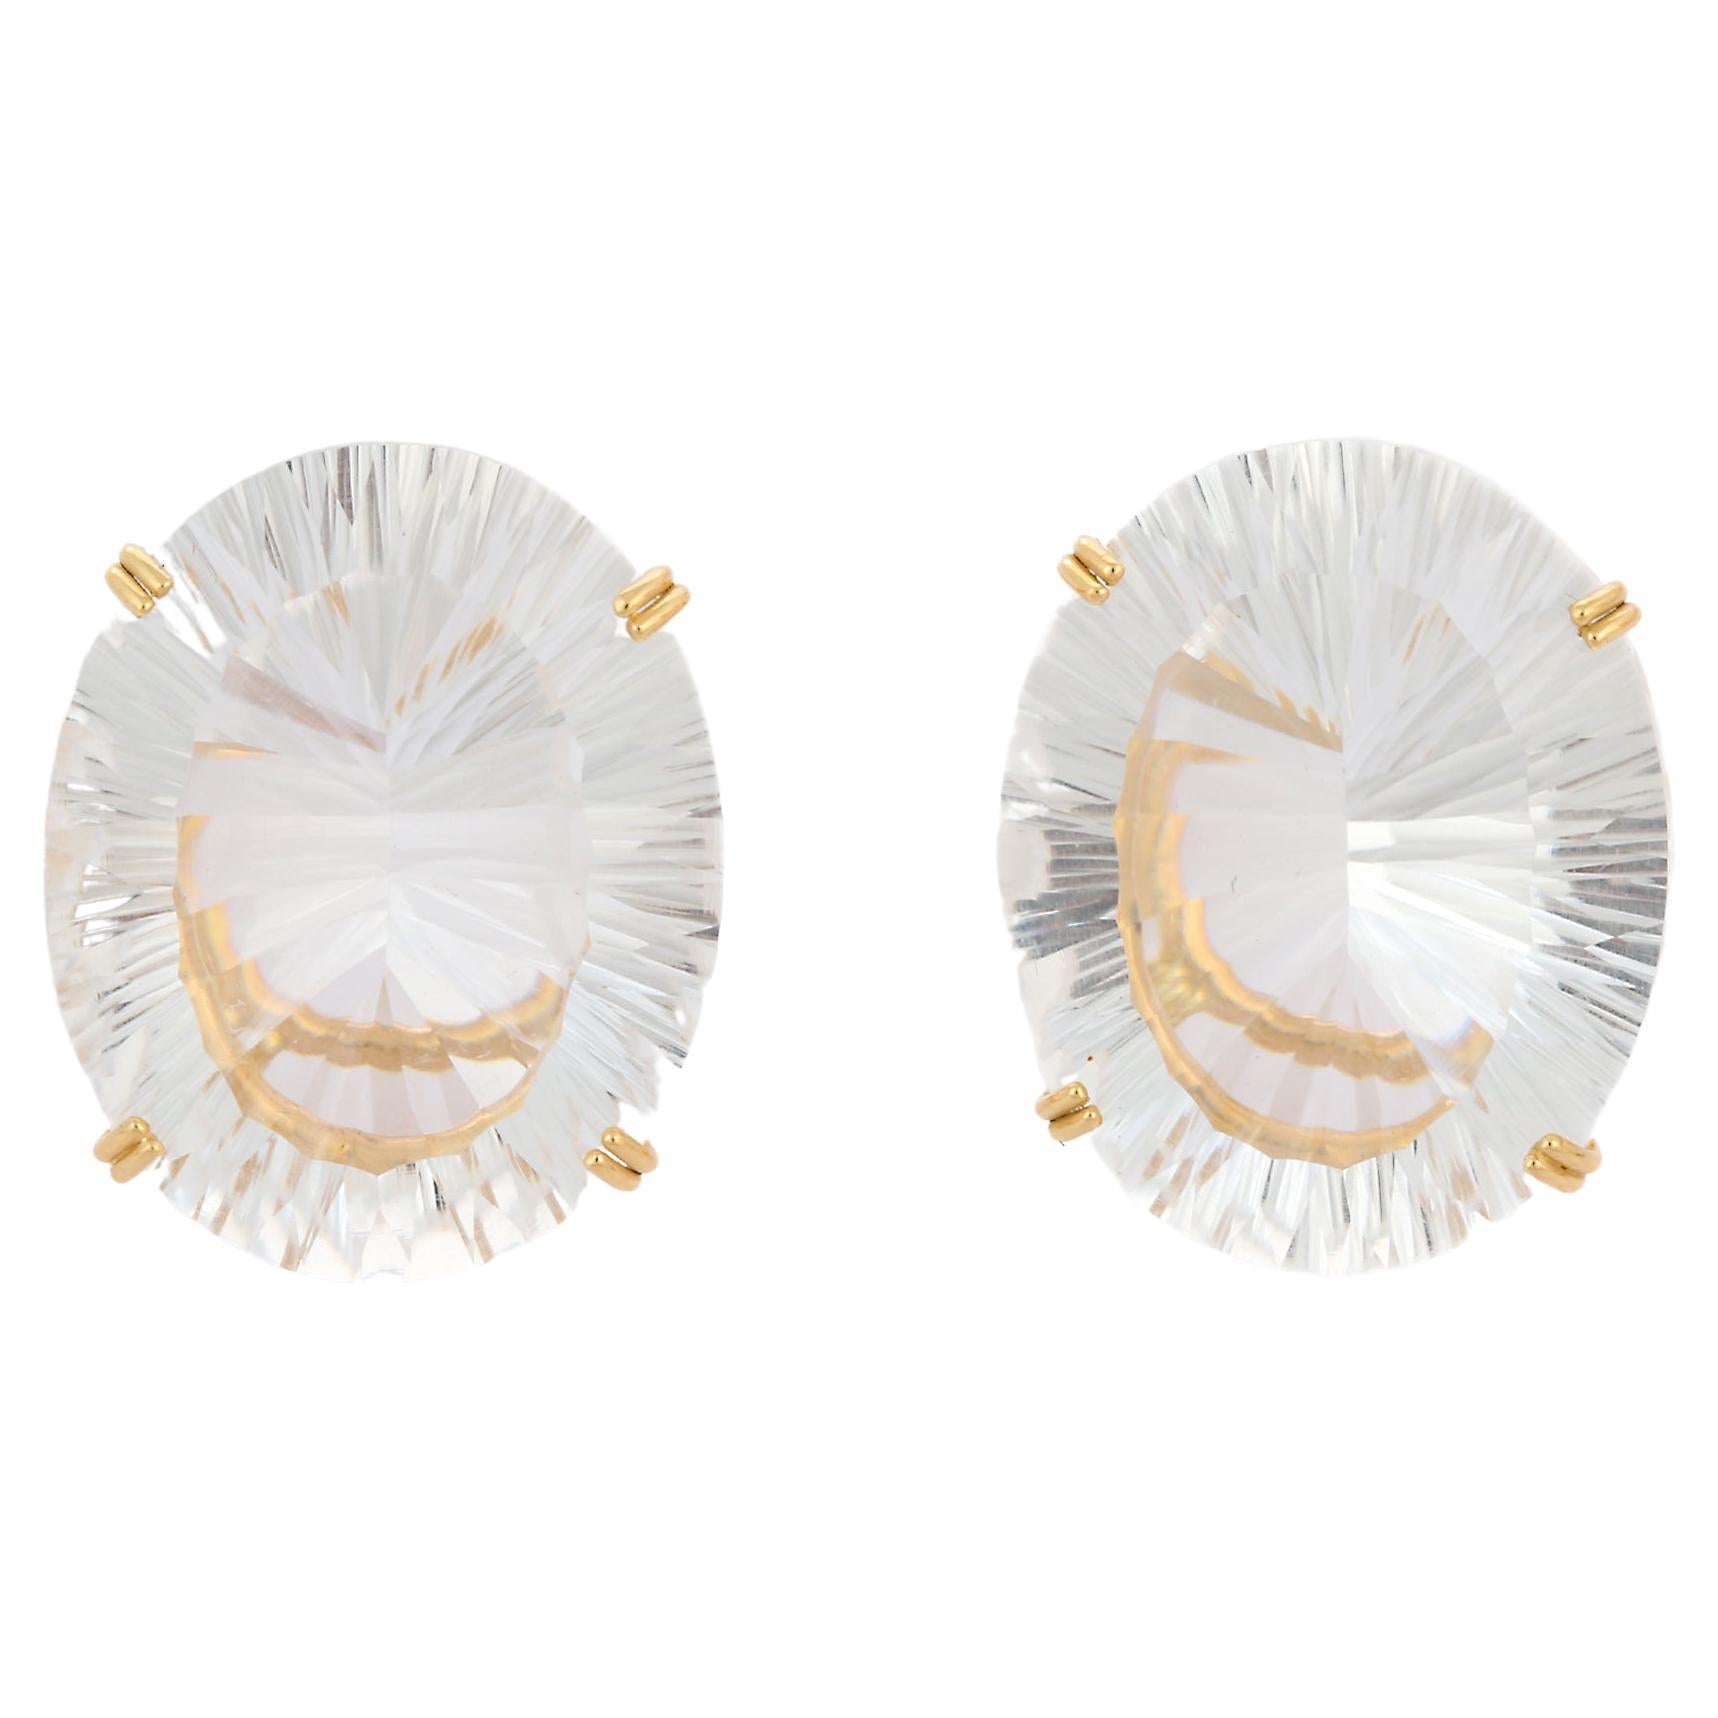 Statement Oval Cut Crystal Gemstone Stud Earrings in 18K Solid Yellow Gold